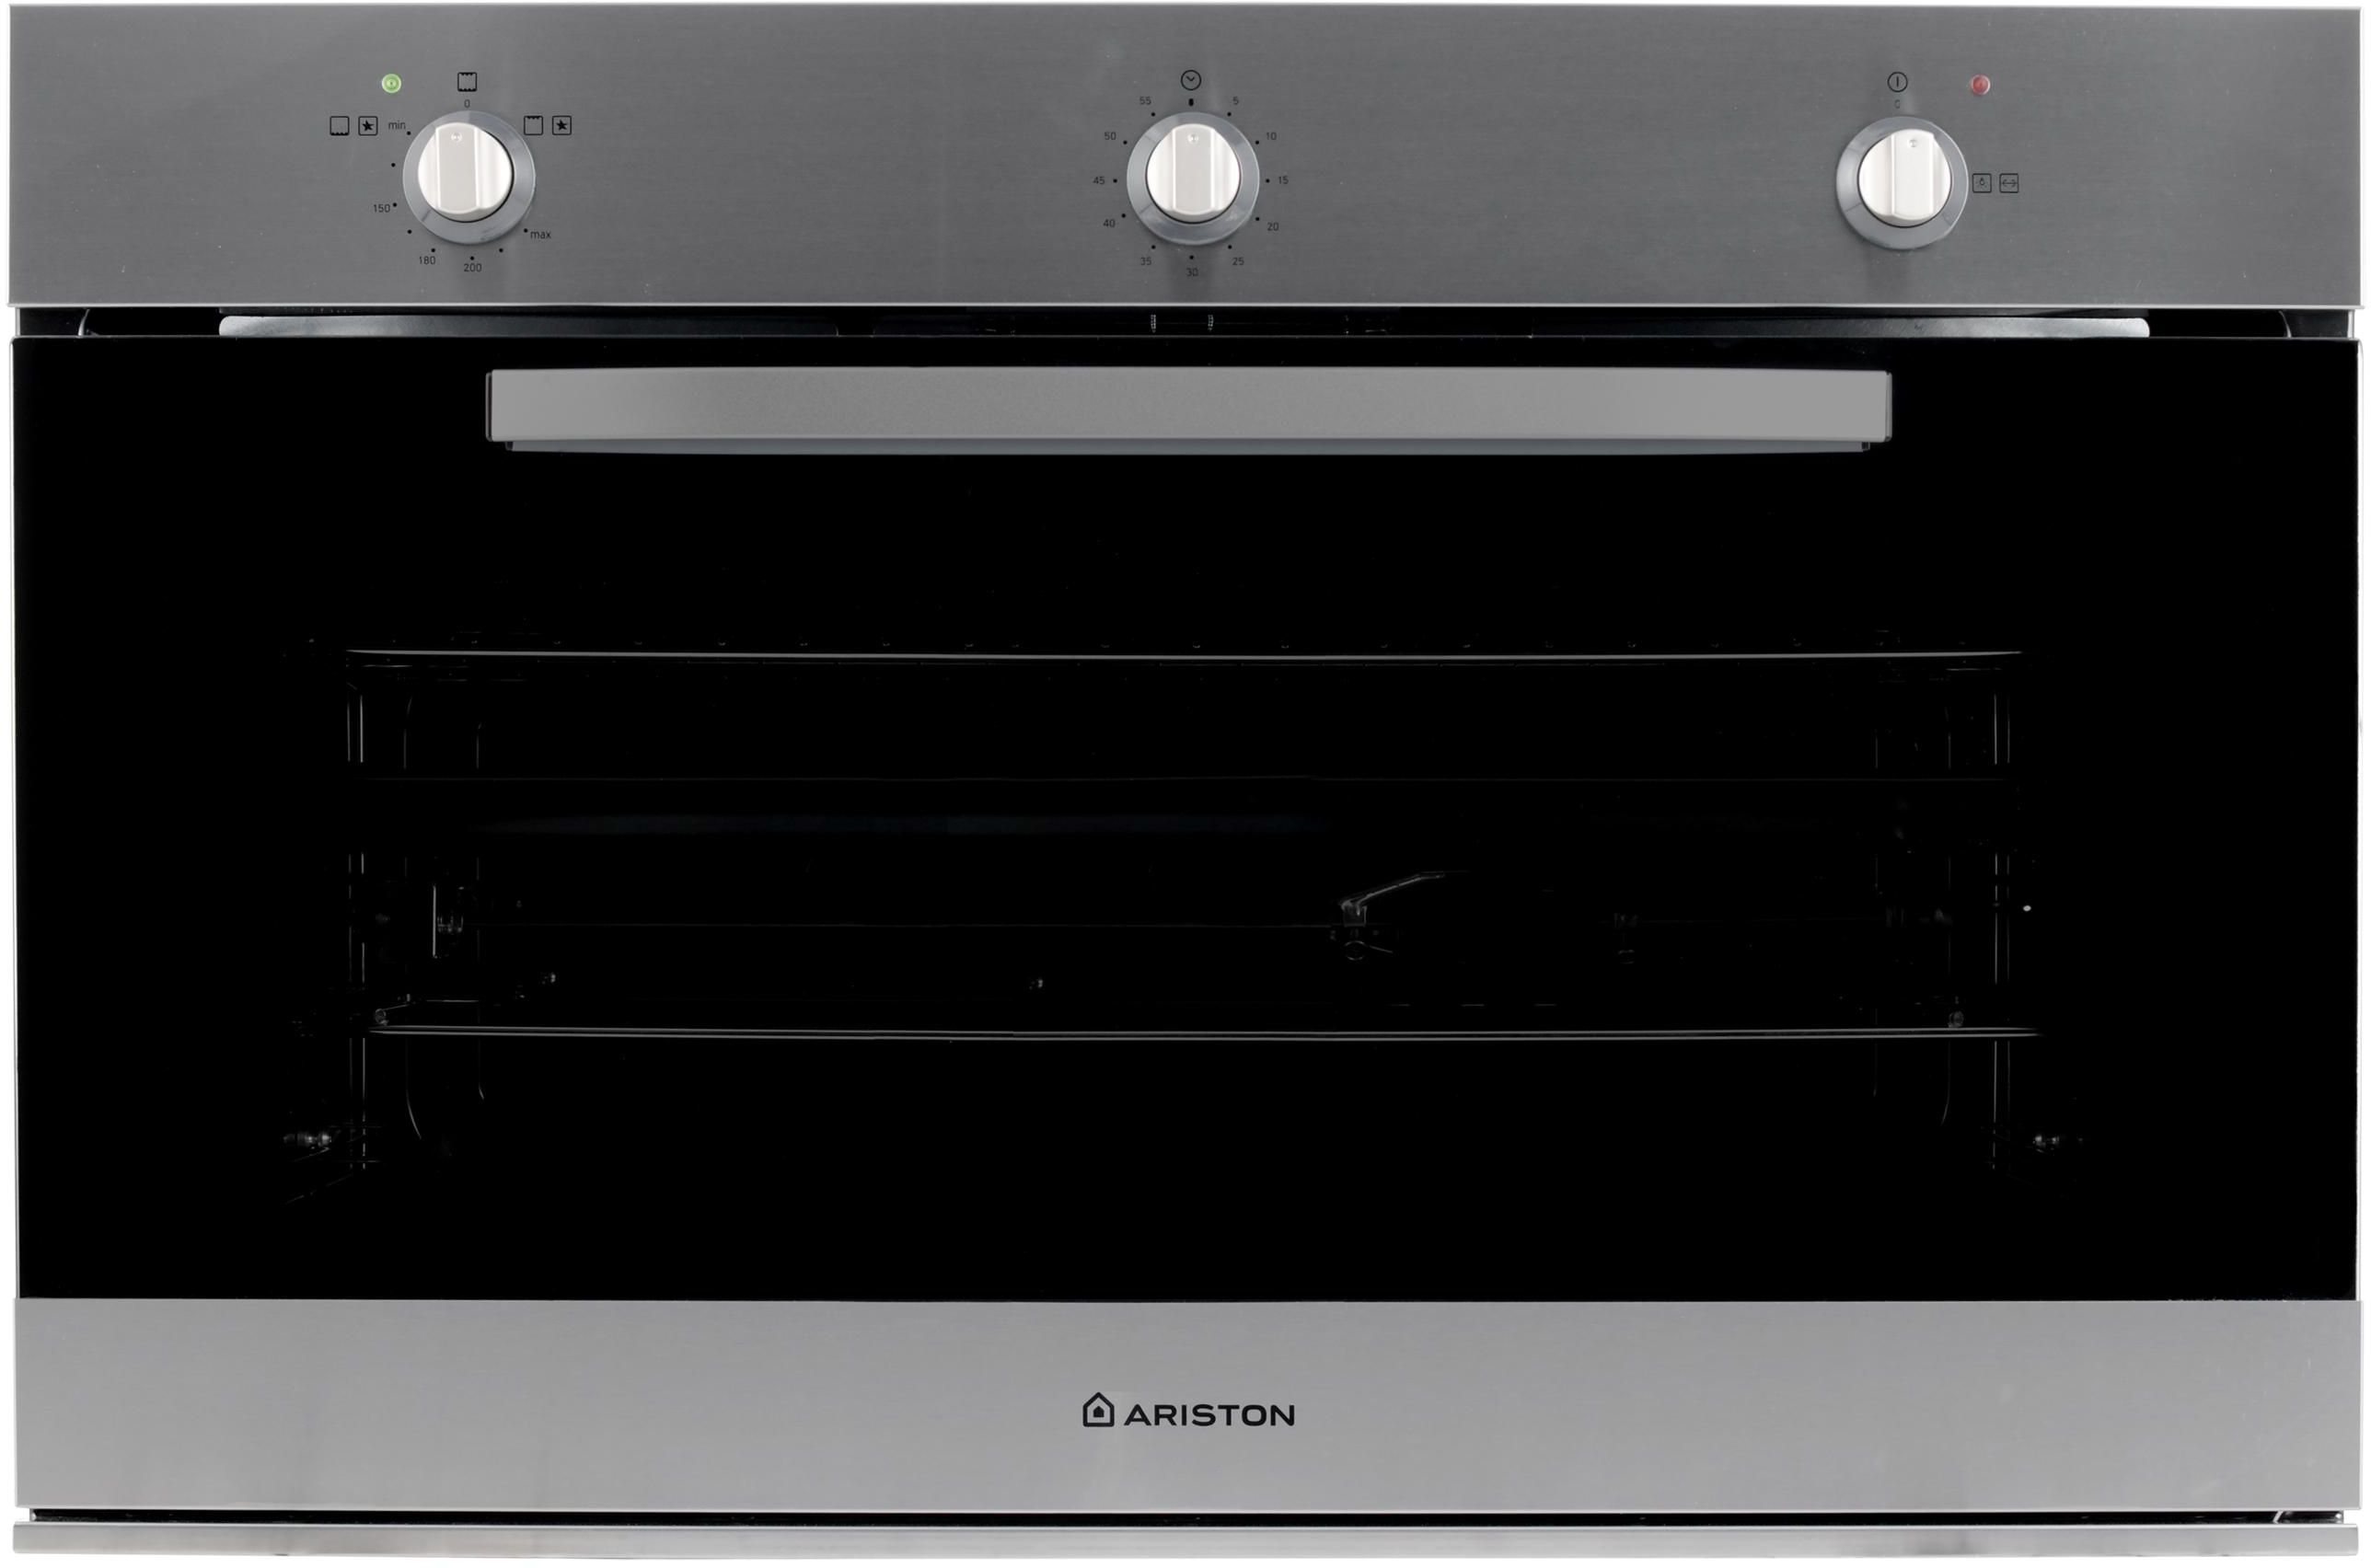 Ariston Built In Oven 90Cms Gas Oven with Gas Grill, 95L Cavity,Inox